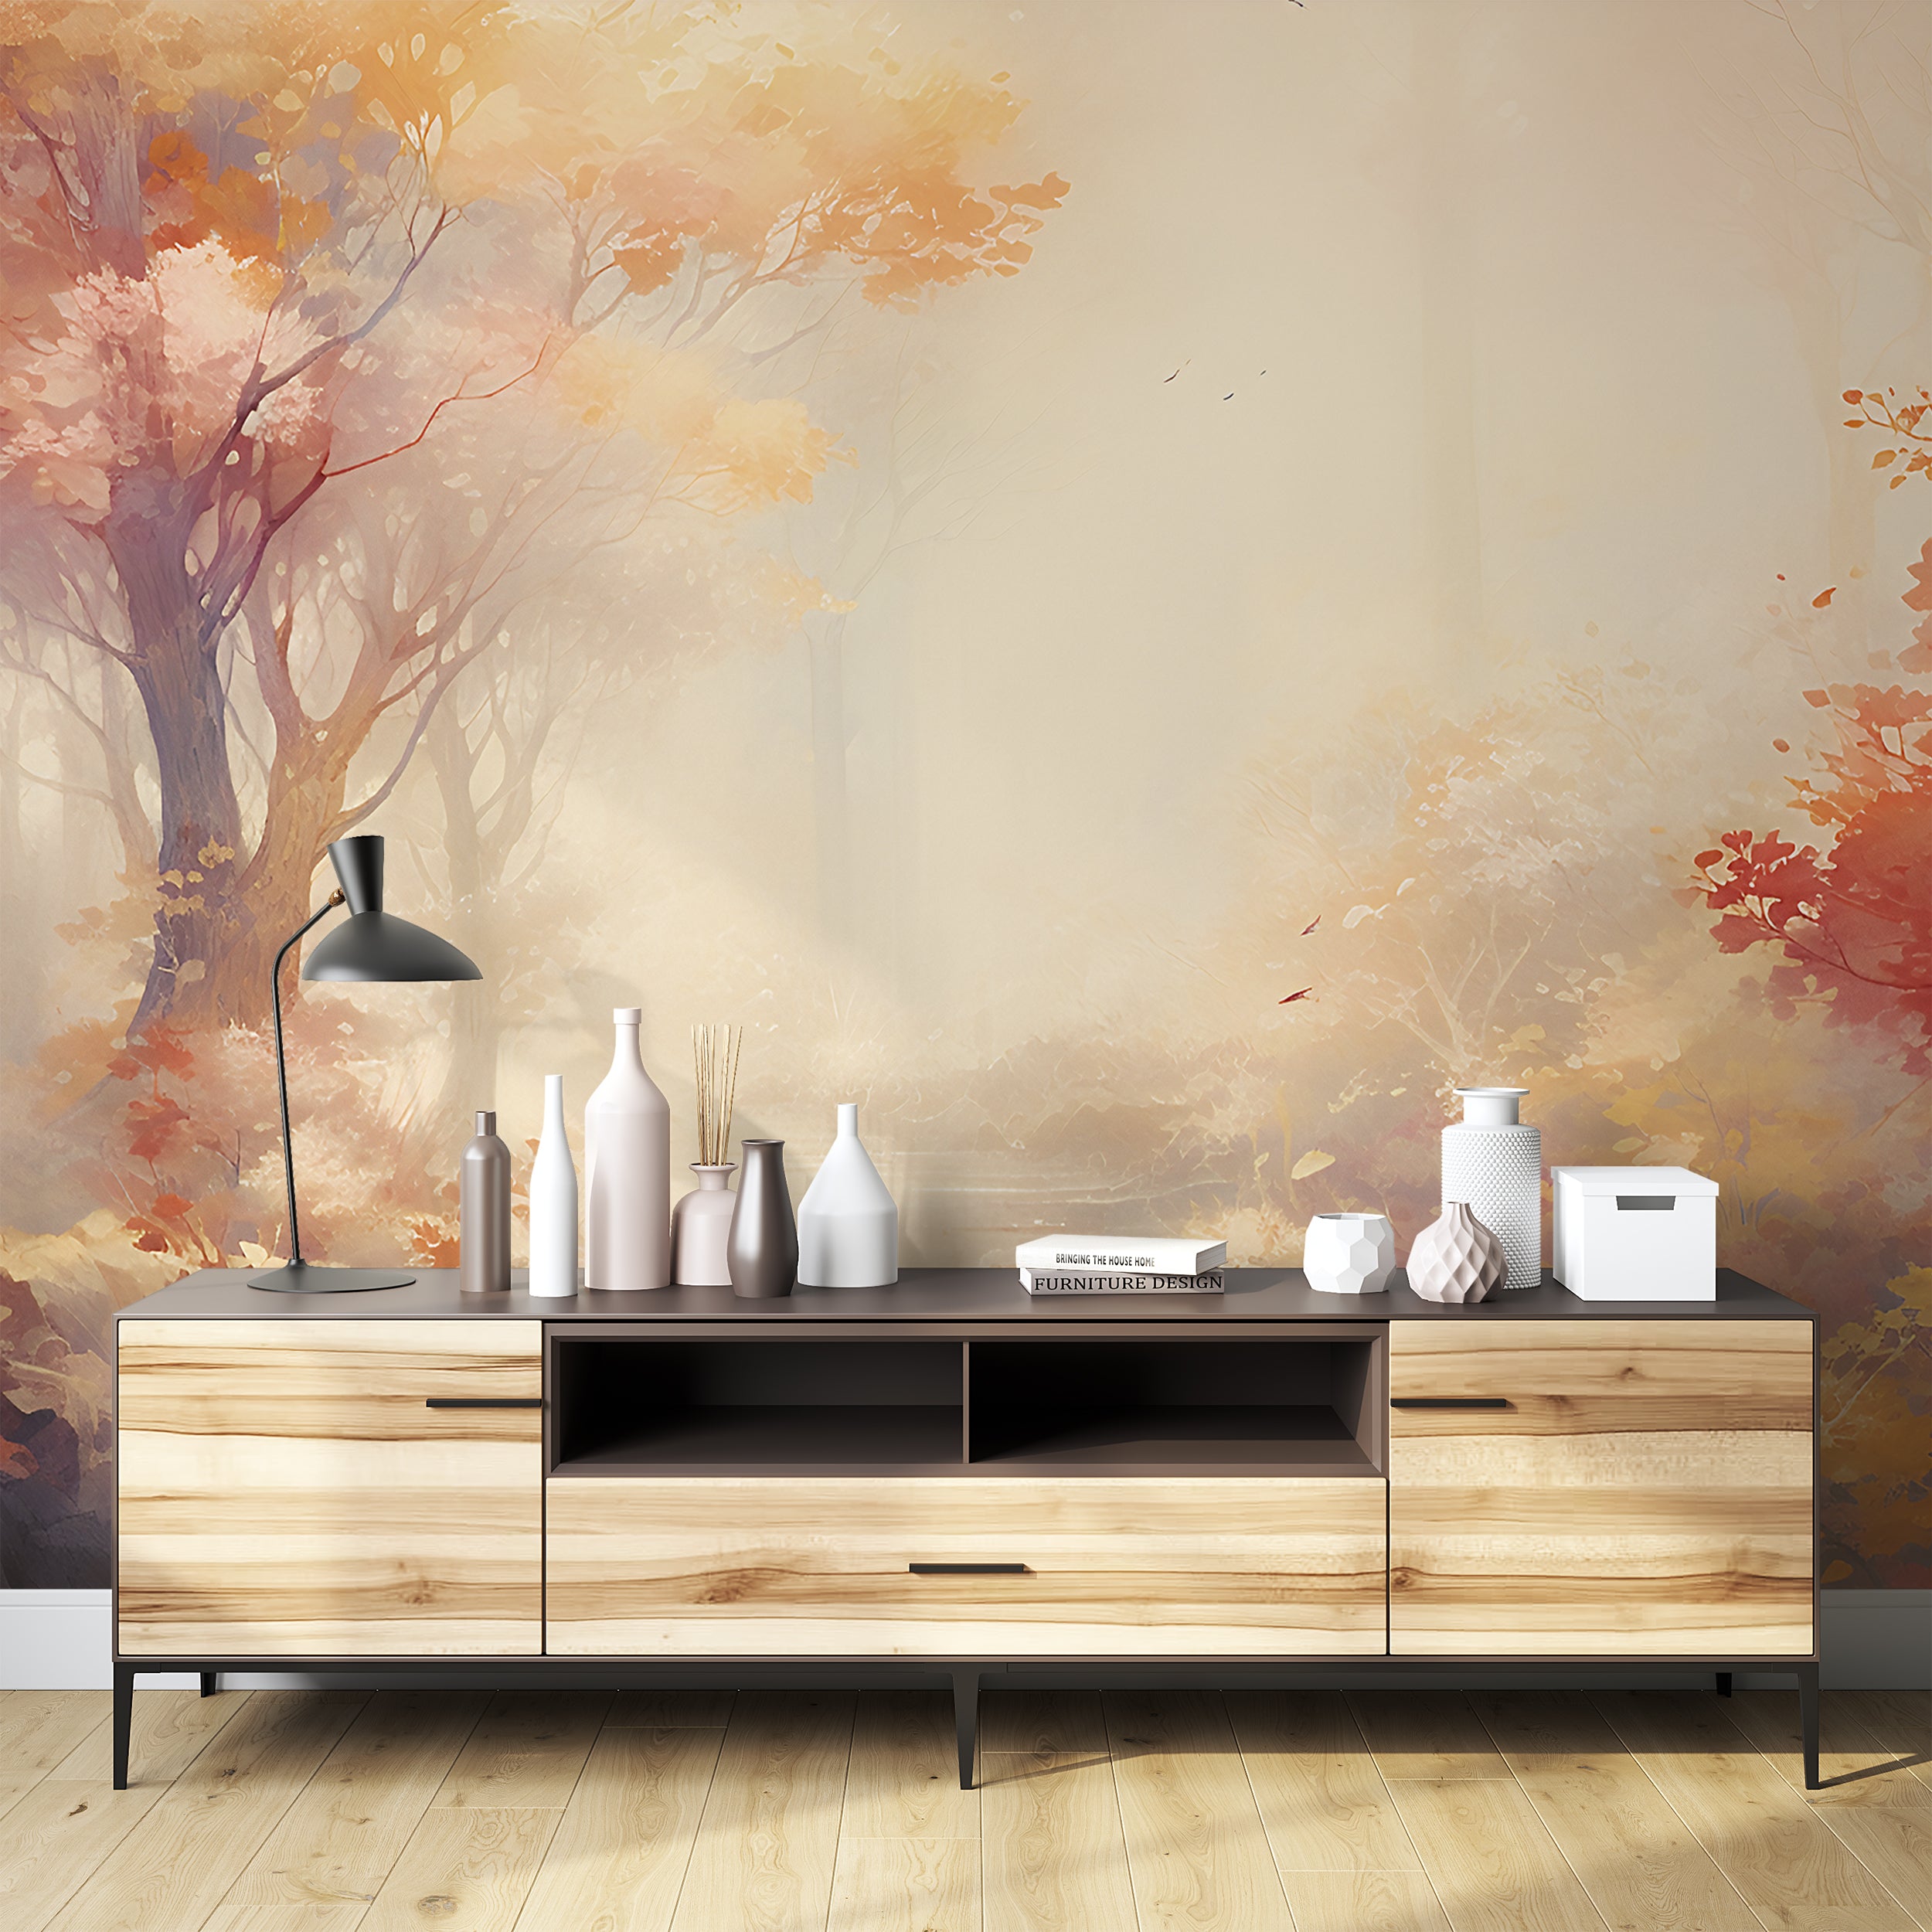 Autumn Forest Mural Peel And Stick" "Foggy Trees Fantasy Nature Wallpap